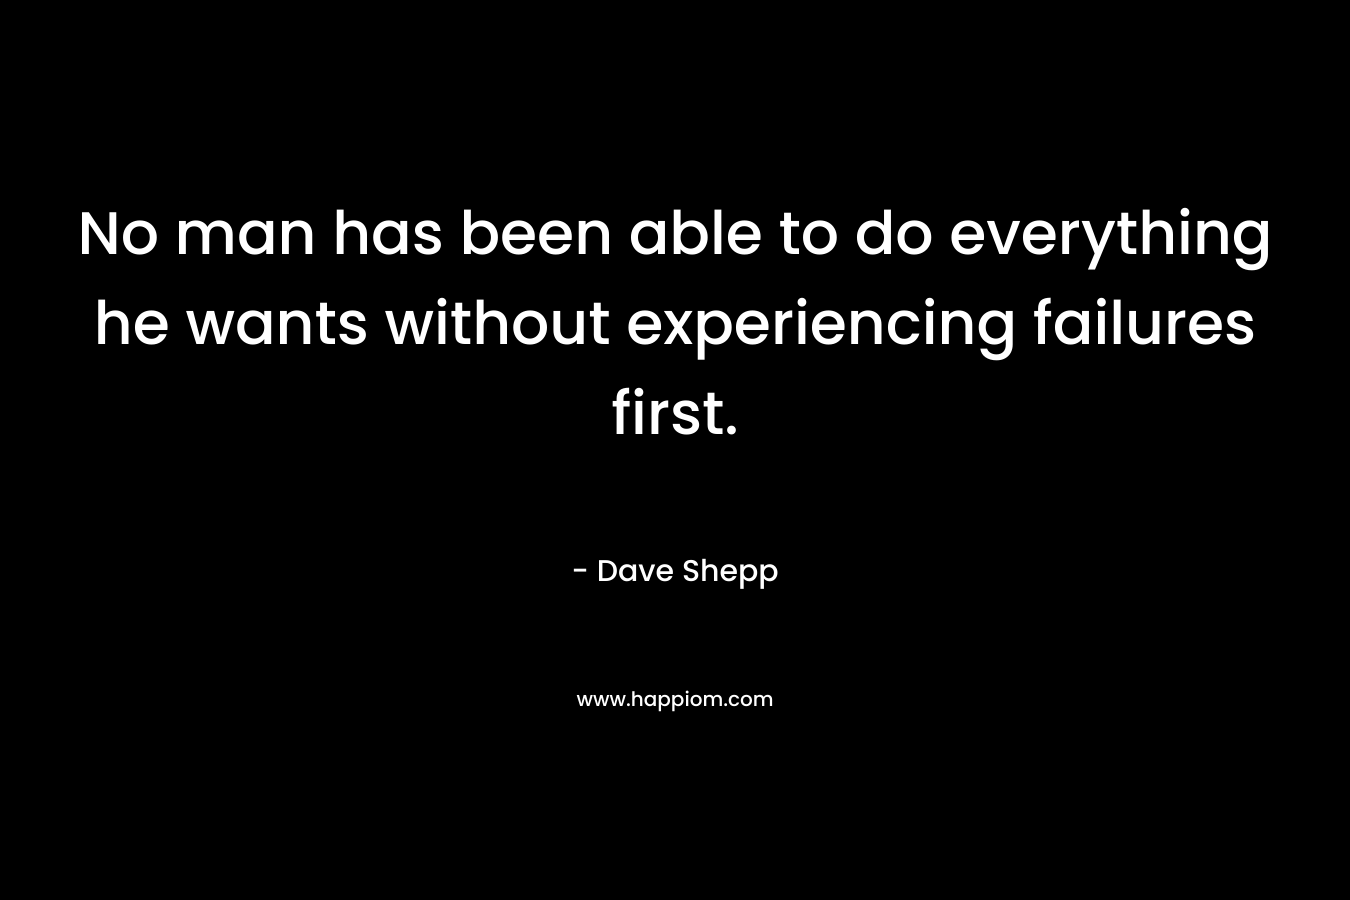 No man has been able to do everything he wants without experiencing failures first.